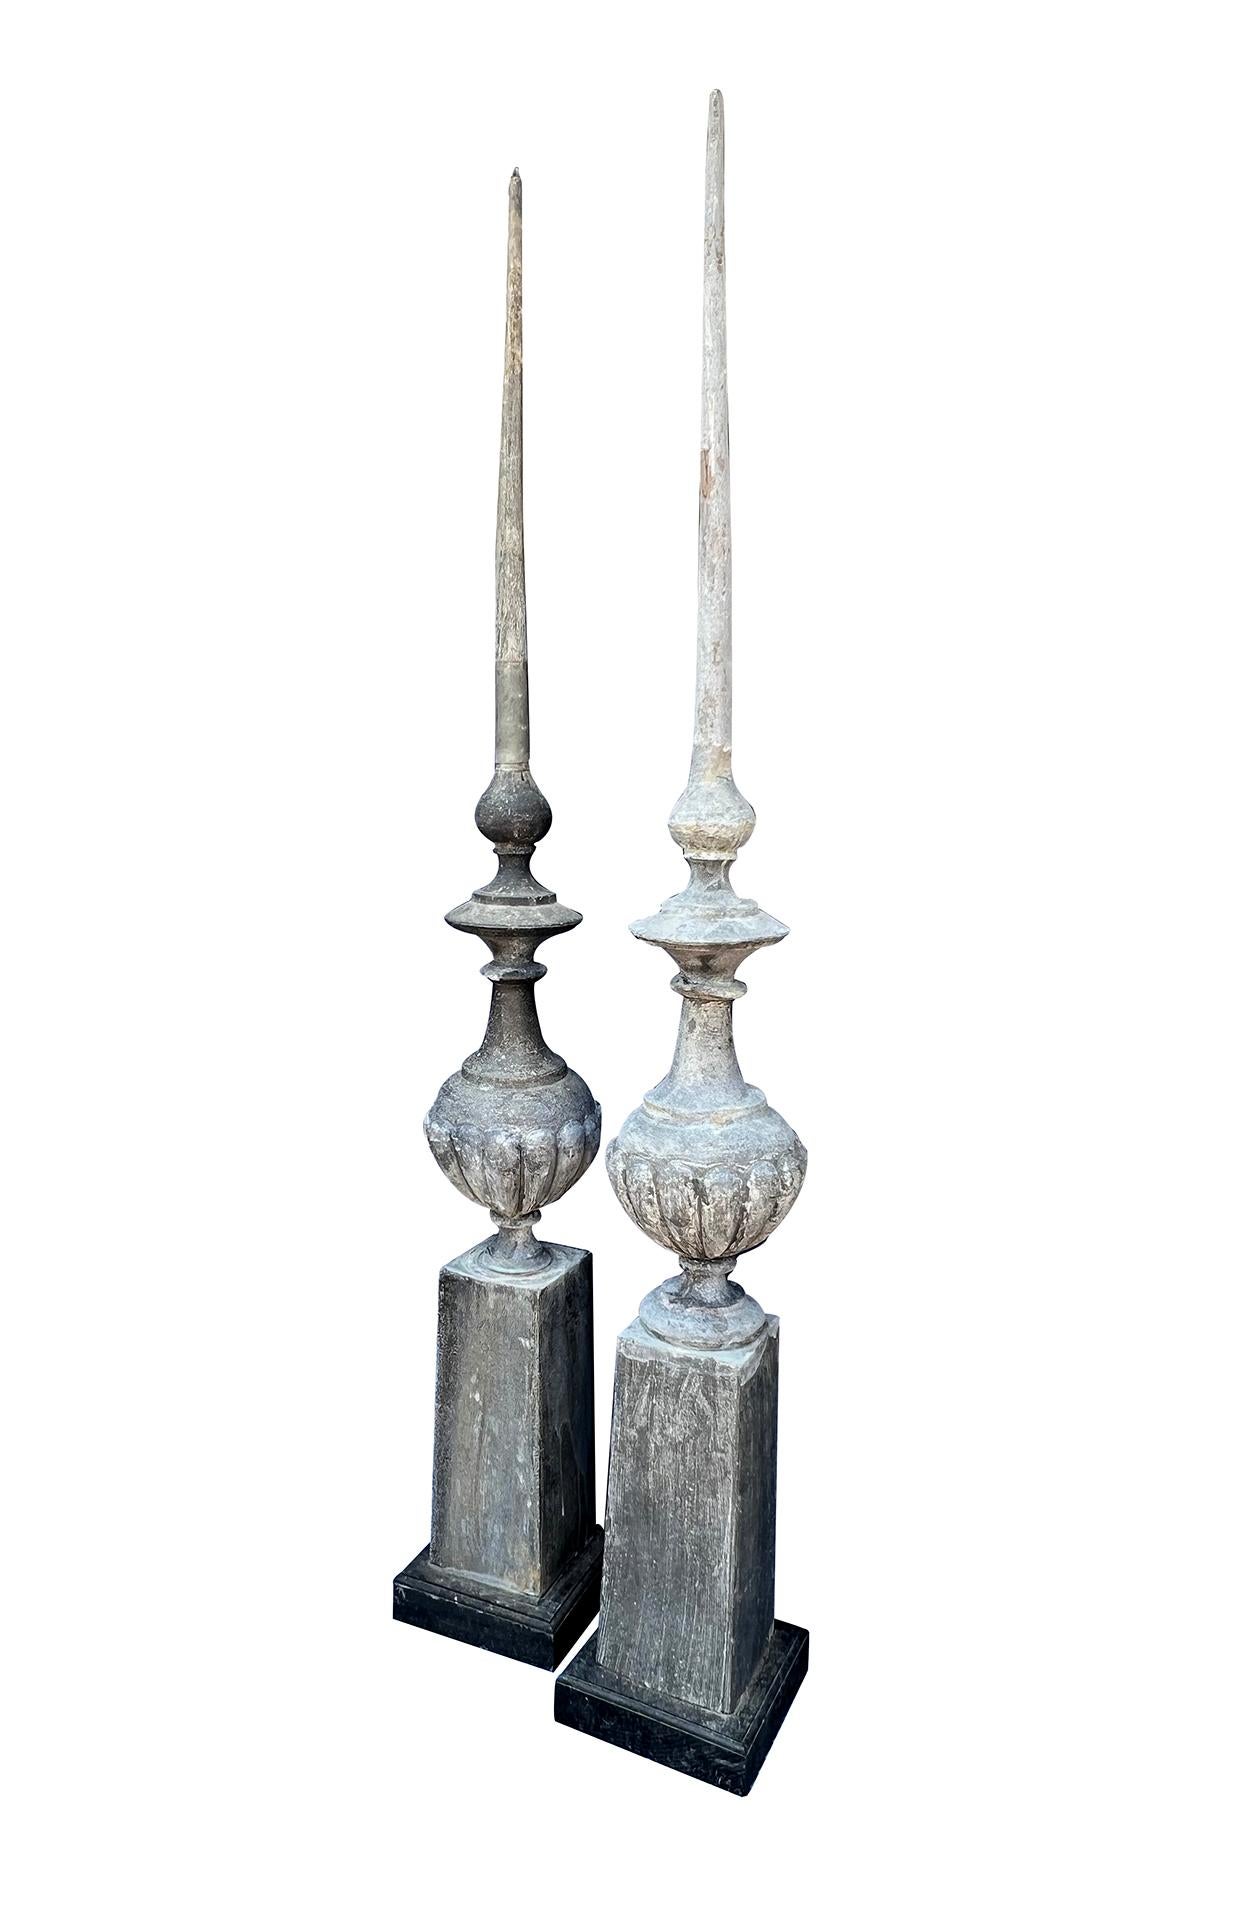 each tall finial with pointed spire above a lobed baluster-form mid-section resting on a graduated square base; the whole on later ebonized wooden plinths